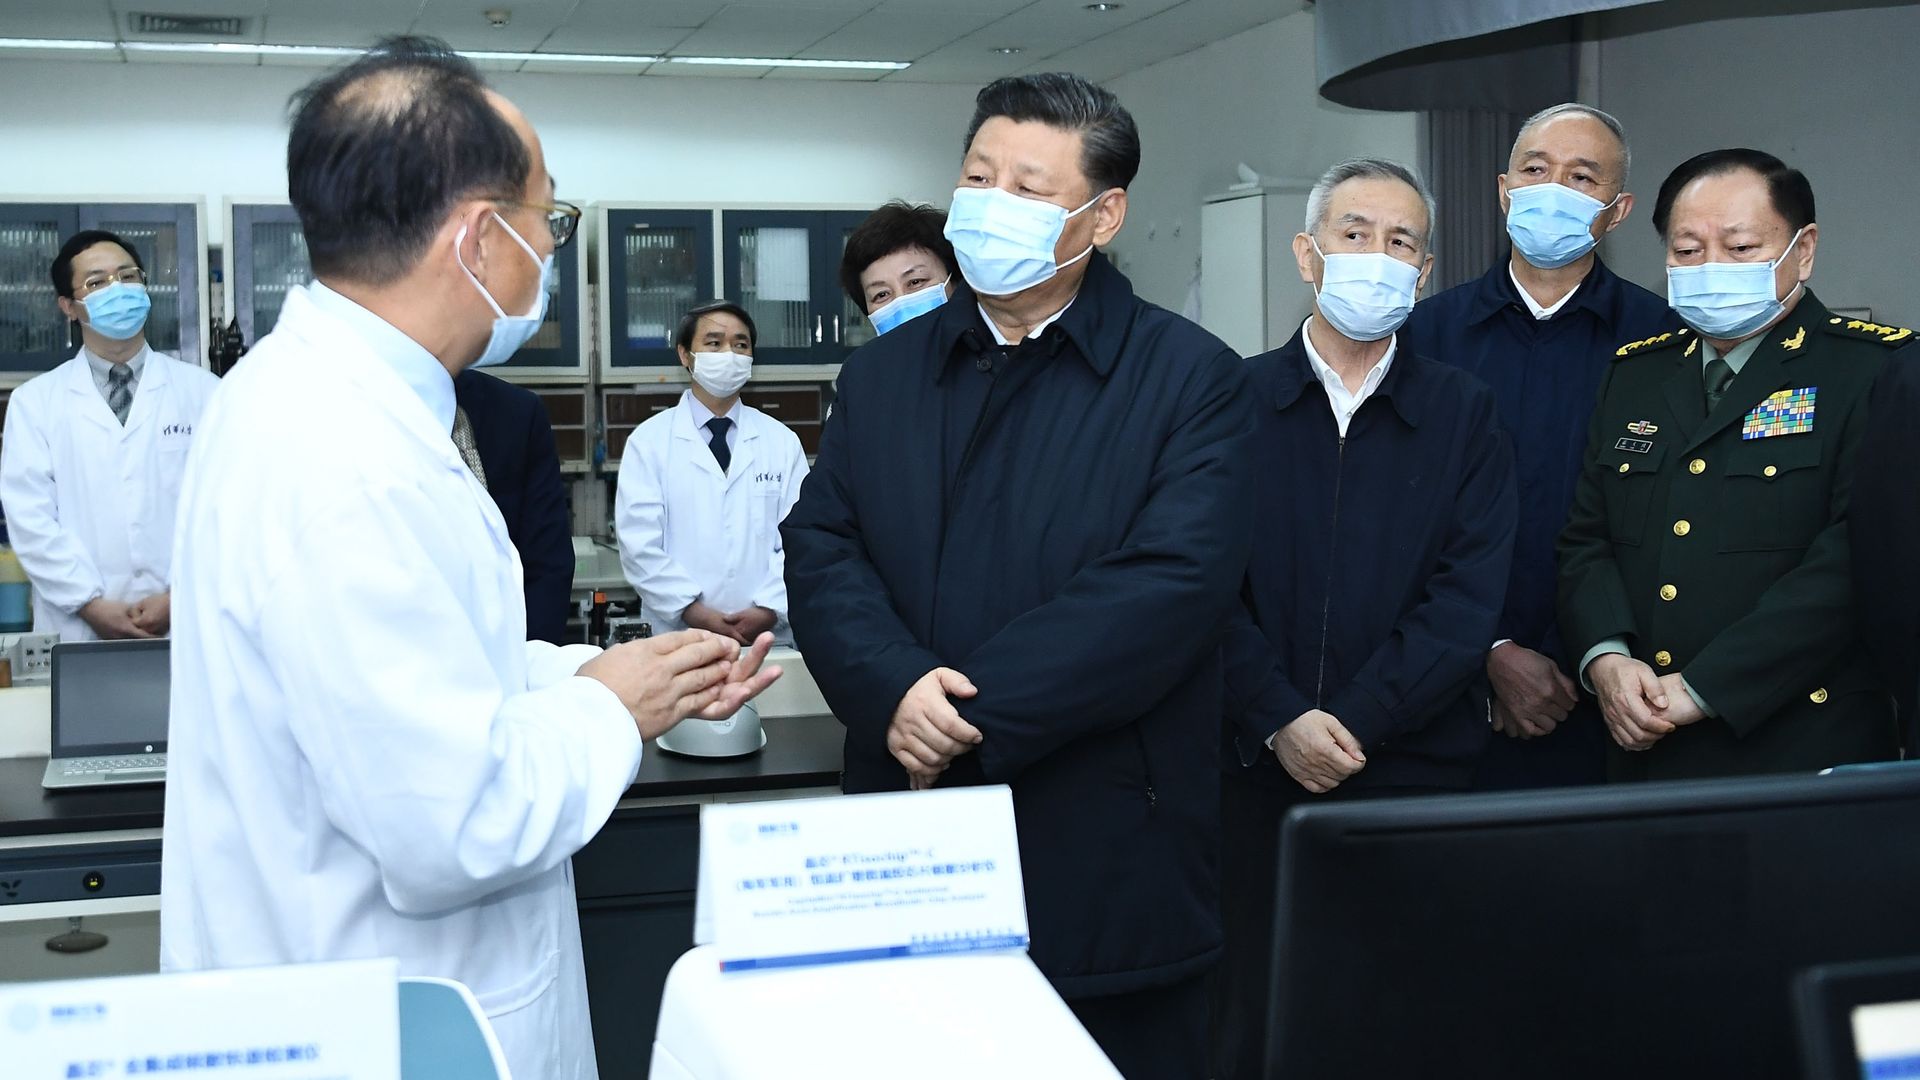 Chinese President Xi Jinping talking to scientists.